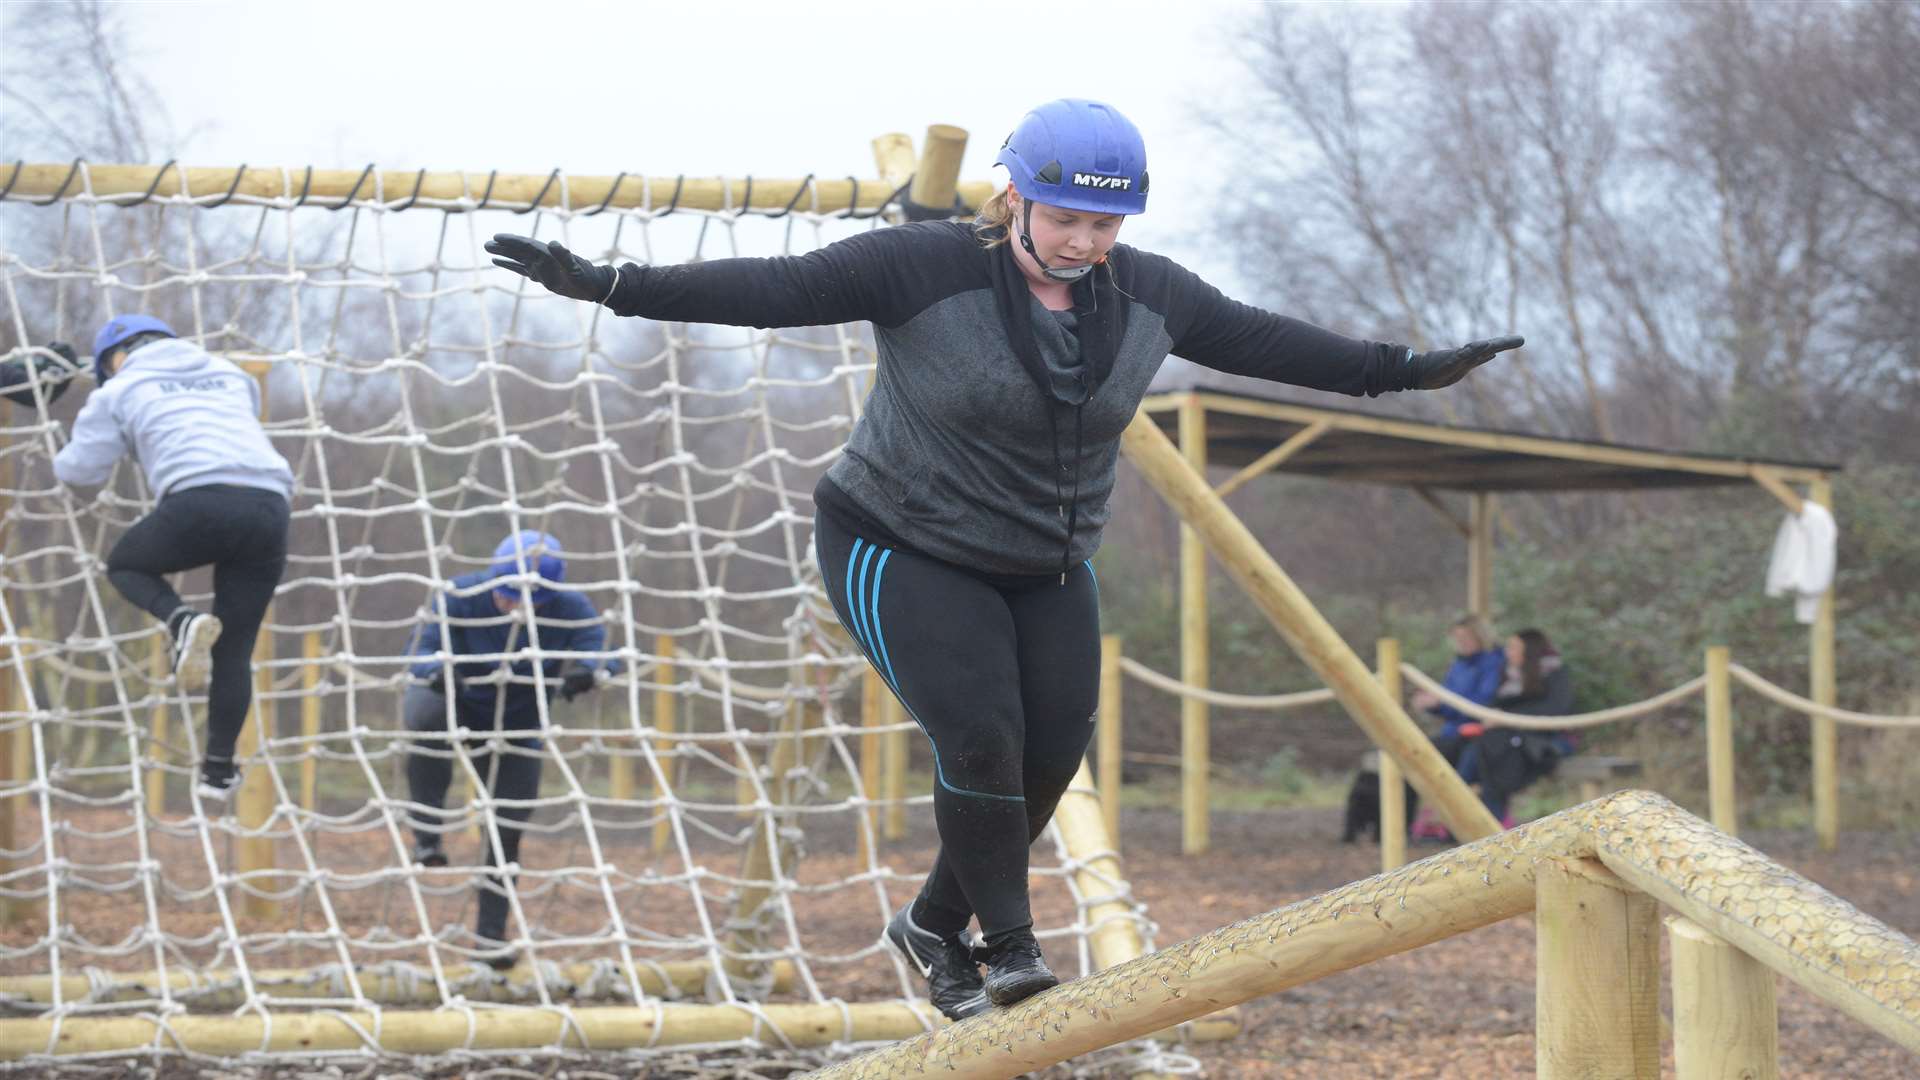 A previous assault course fitness session at Betteshanger Park, Deal.